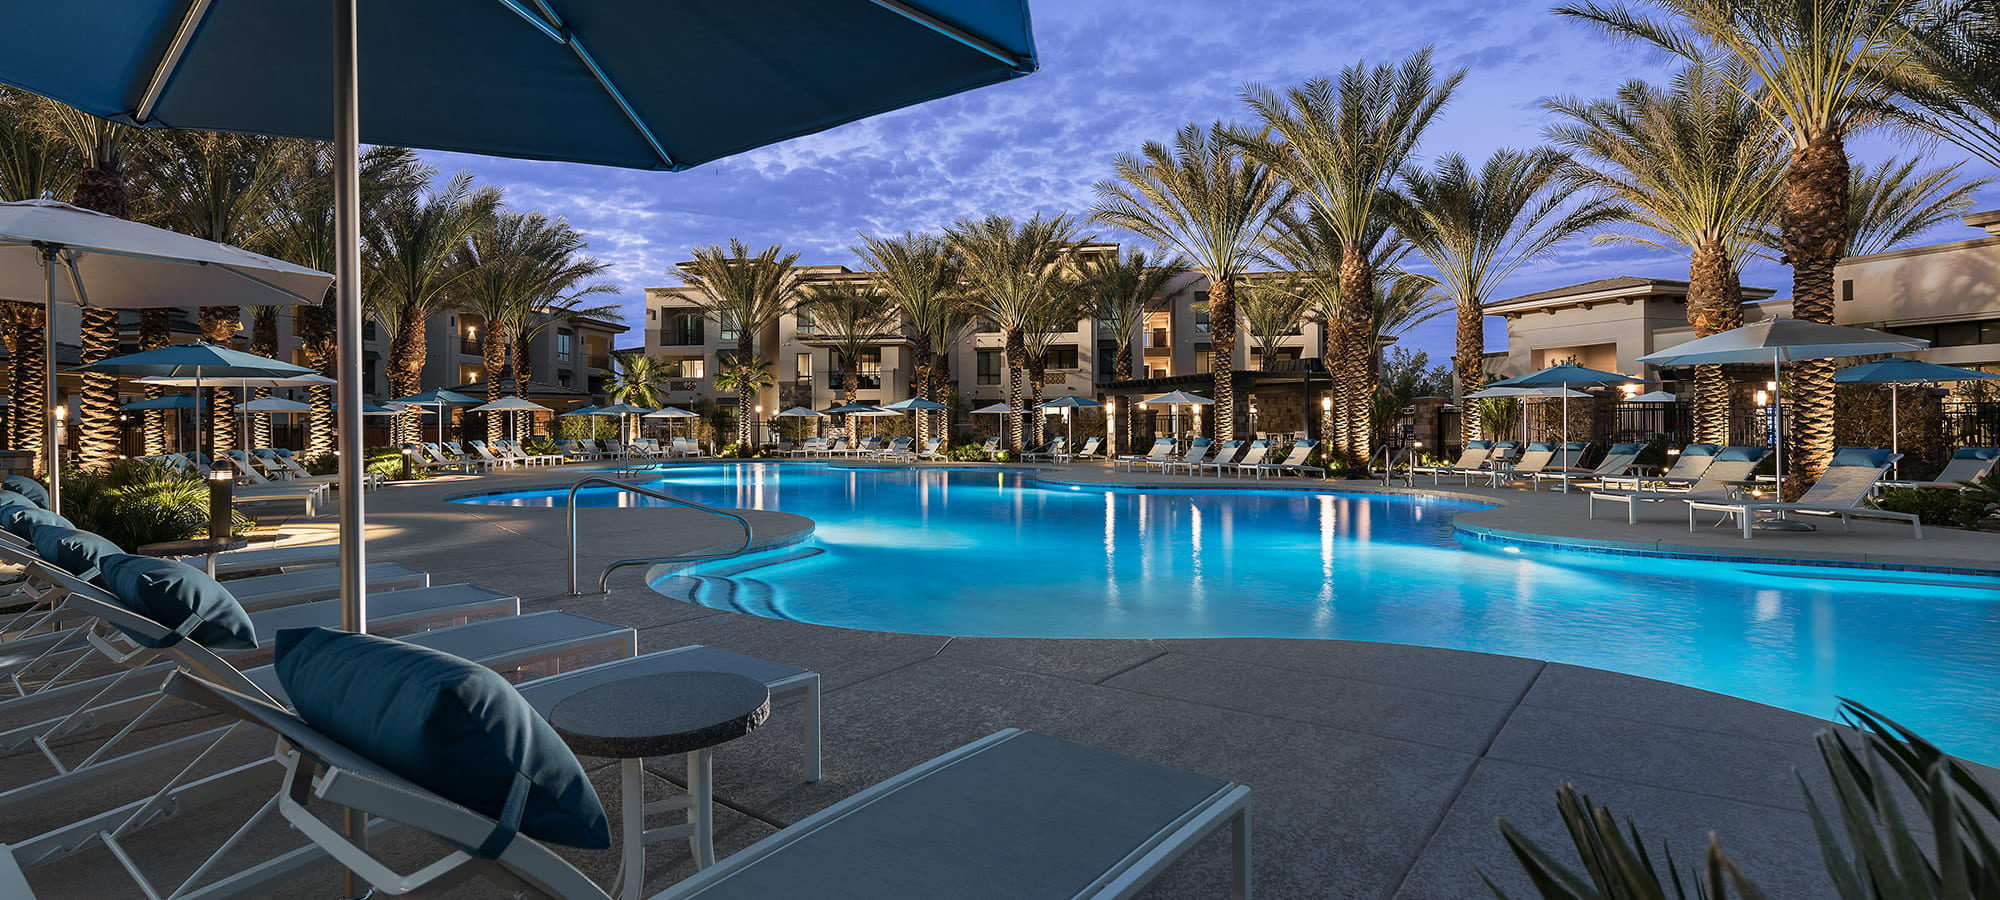 Resort style pool in the evening at San Artes in Scottsdale, Arizona